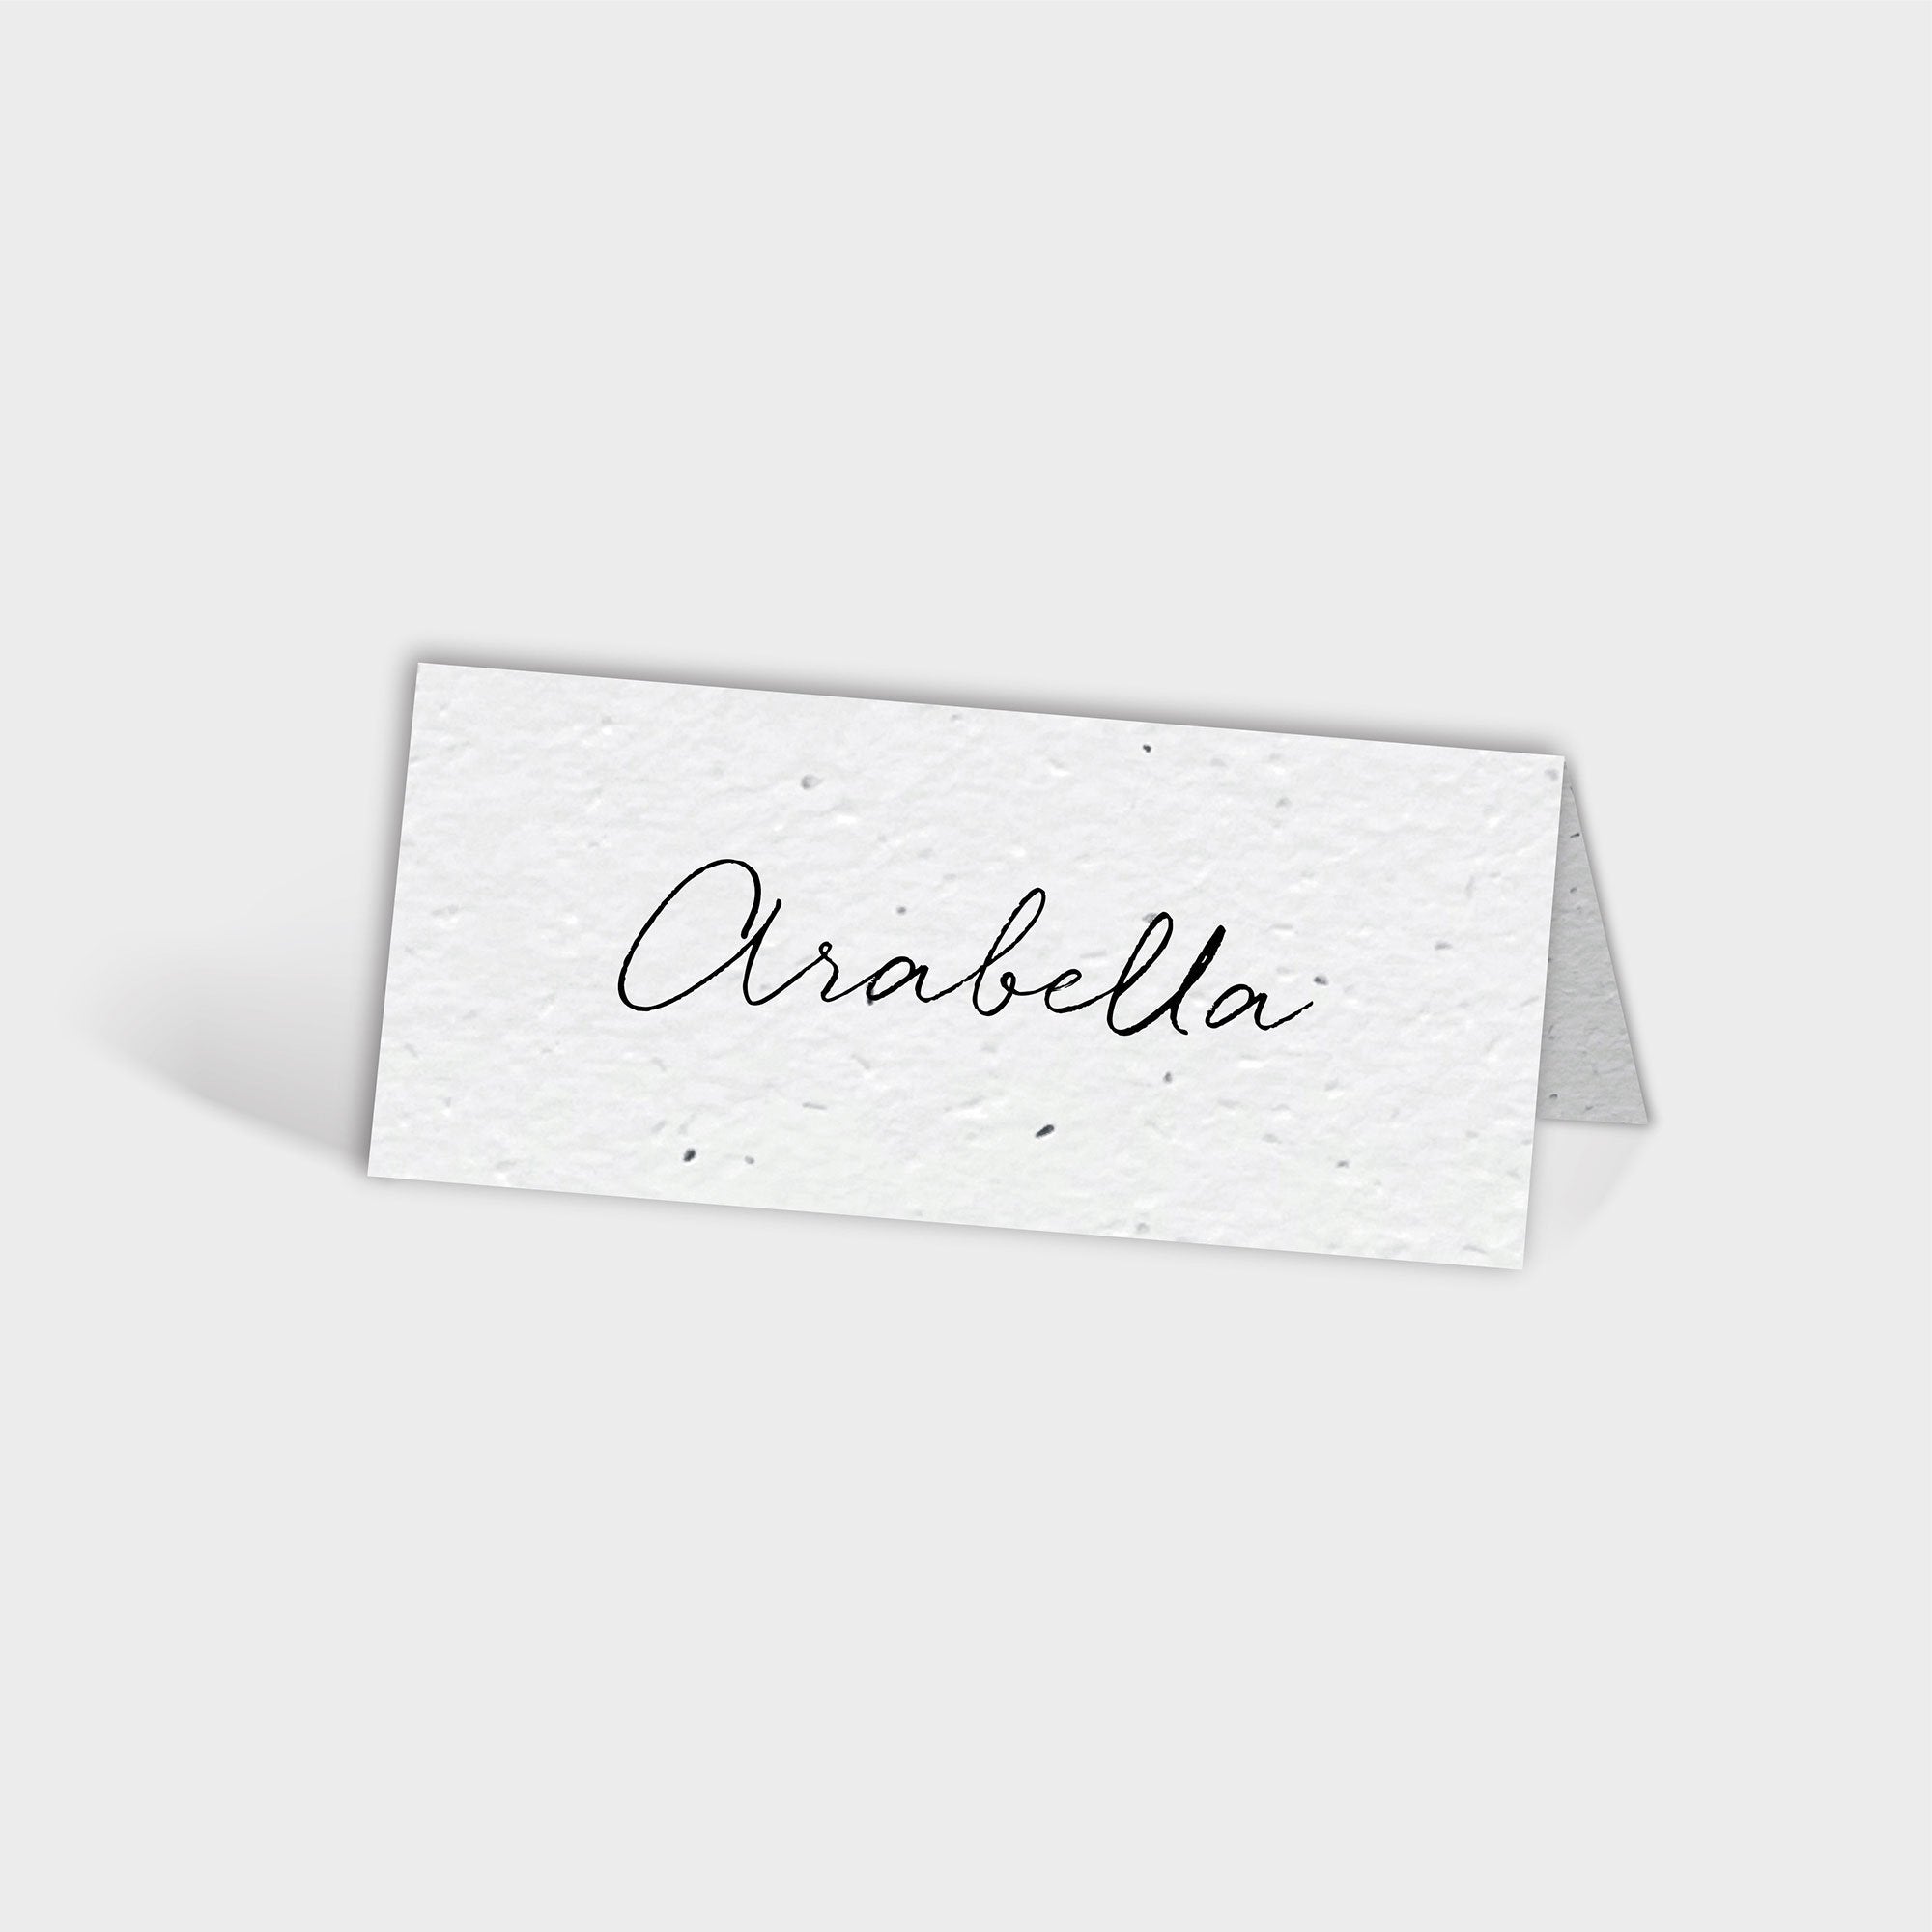 Shop online Quick Cursive - 100% biodegradable seed-embedded cards Shop -The Seed Card Company